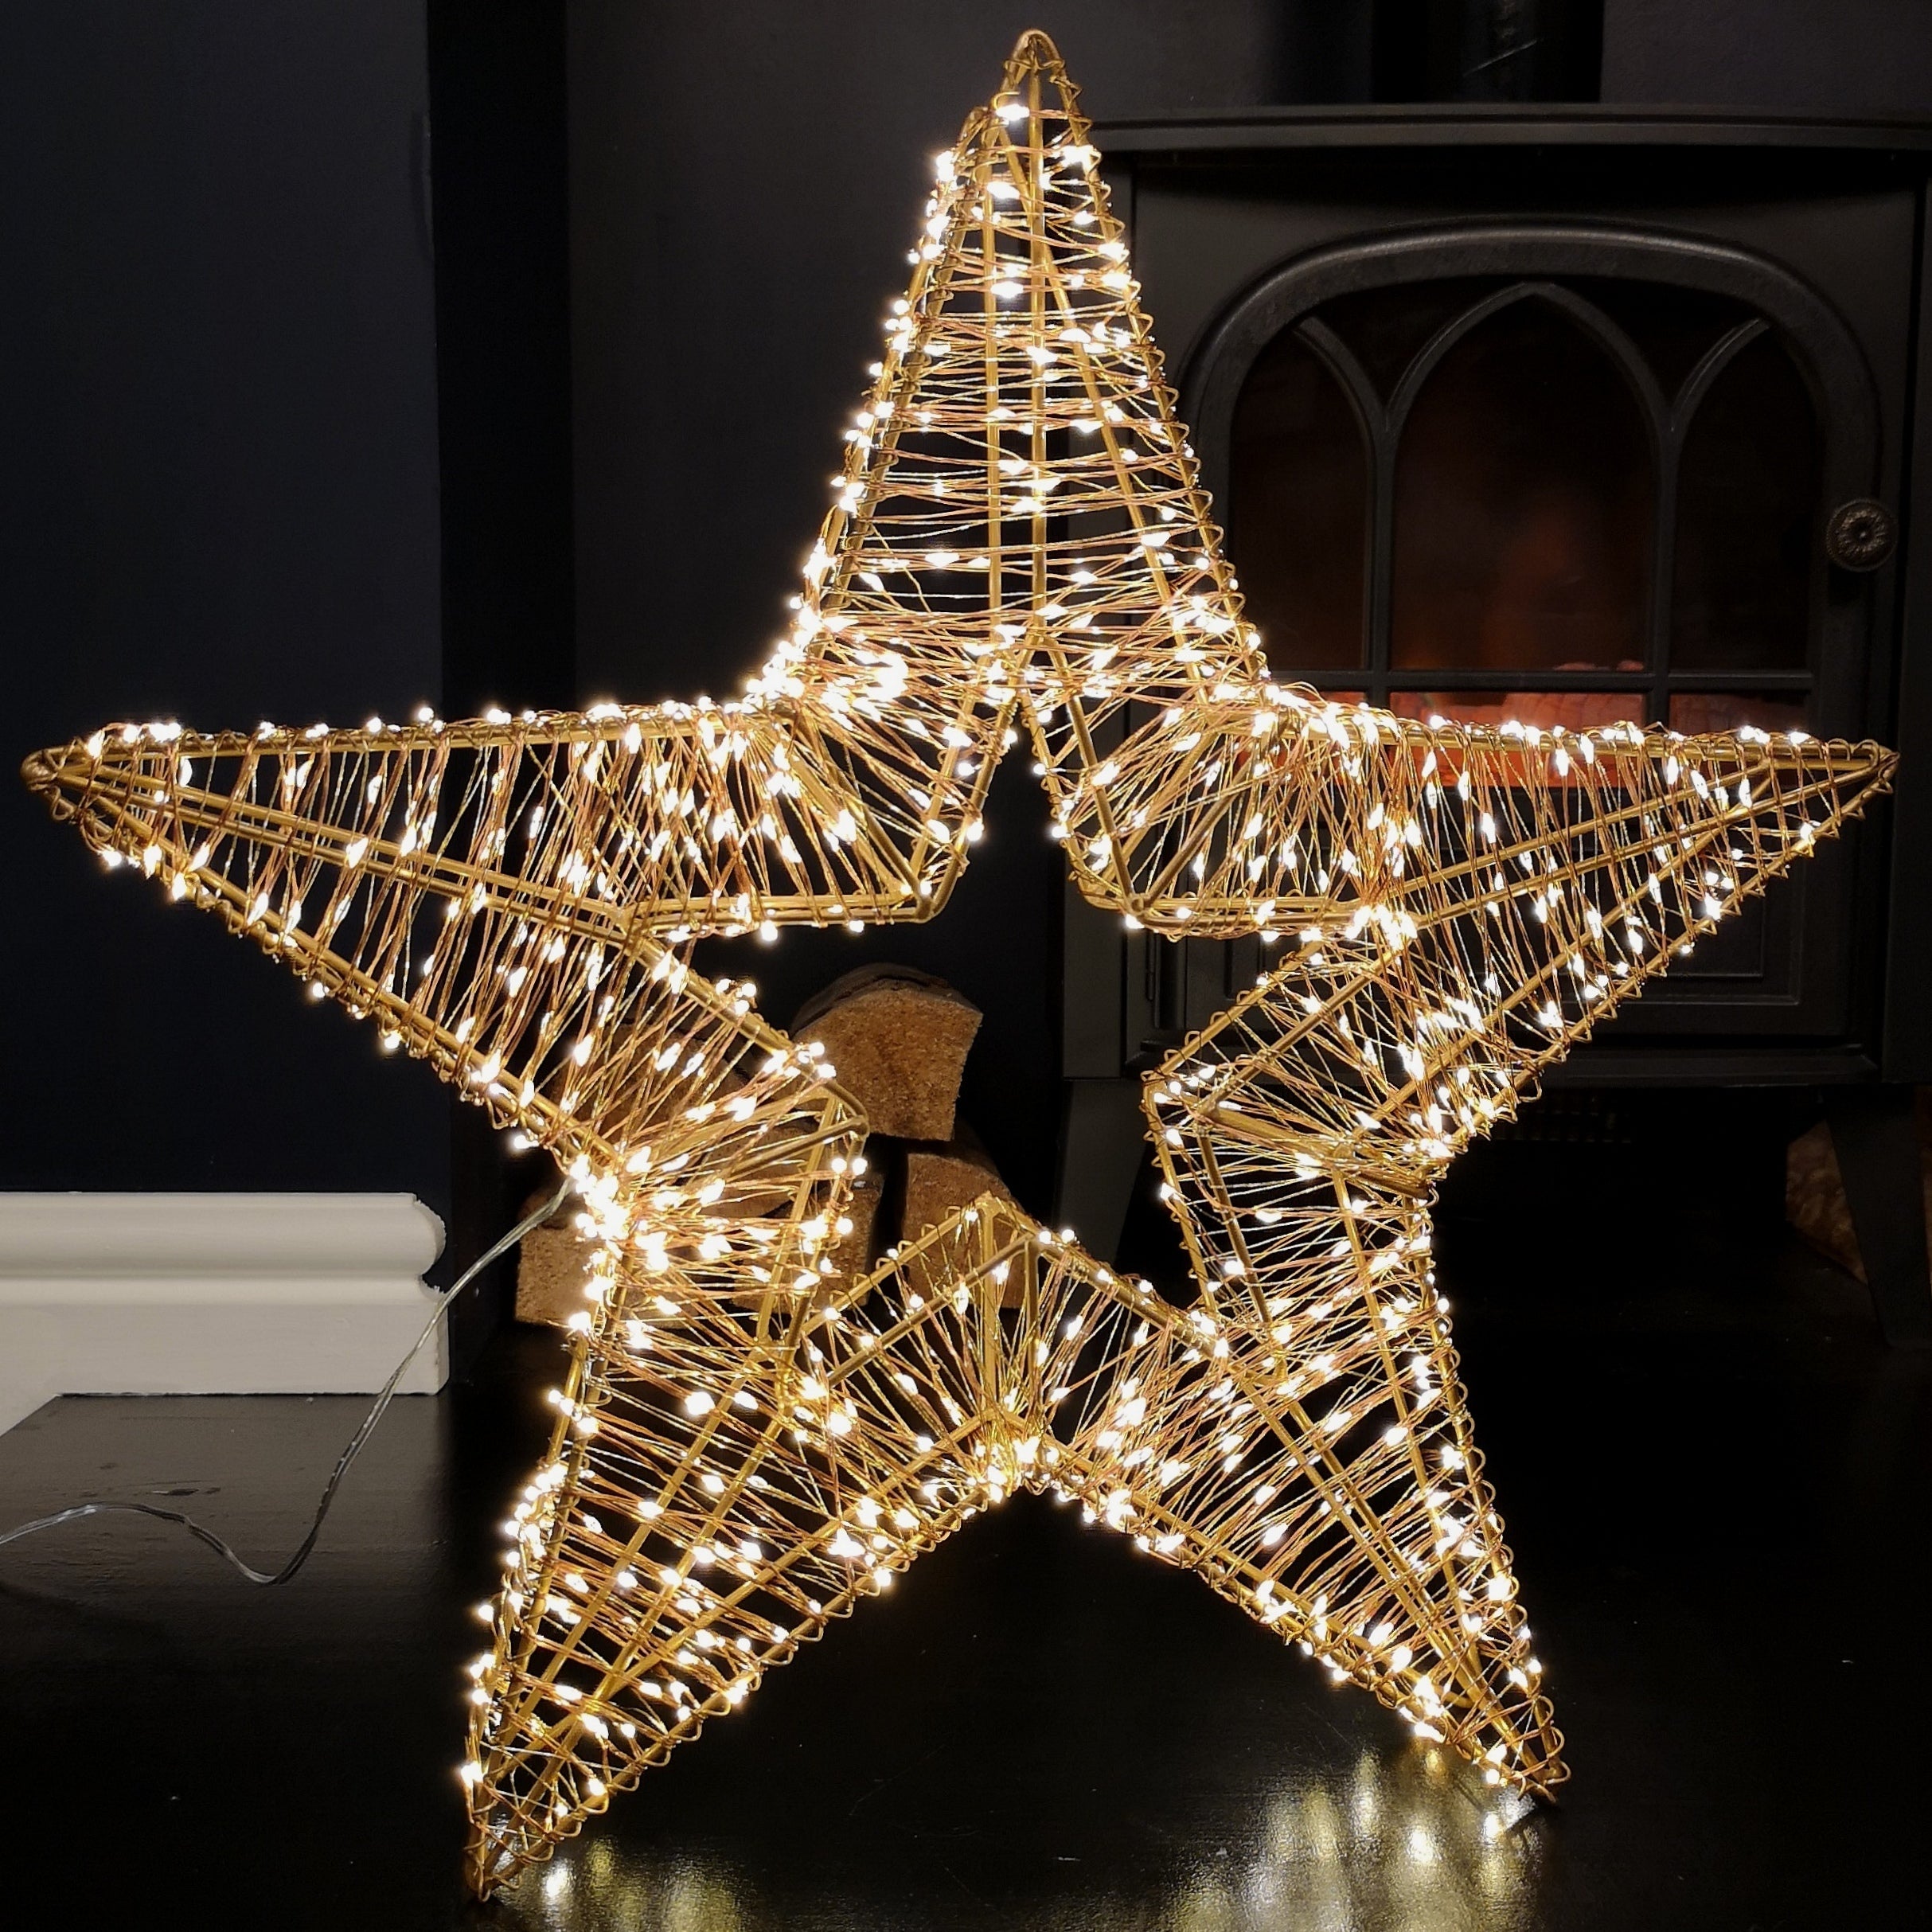 45cm Light Up Rose Gold Star Christmas Sculpture Decoration with 750 Warm White LEDs